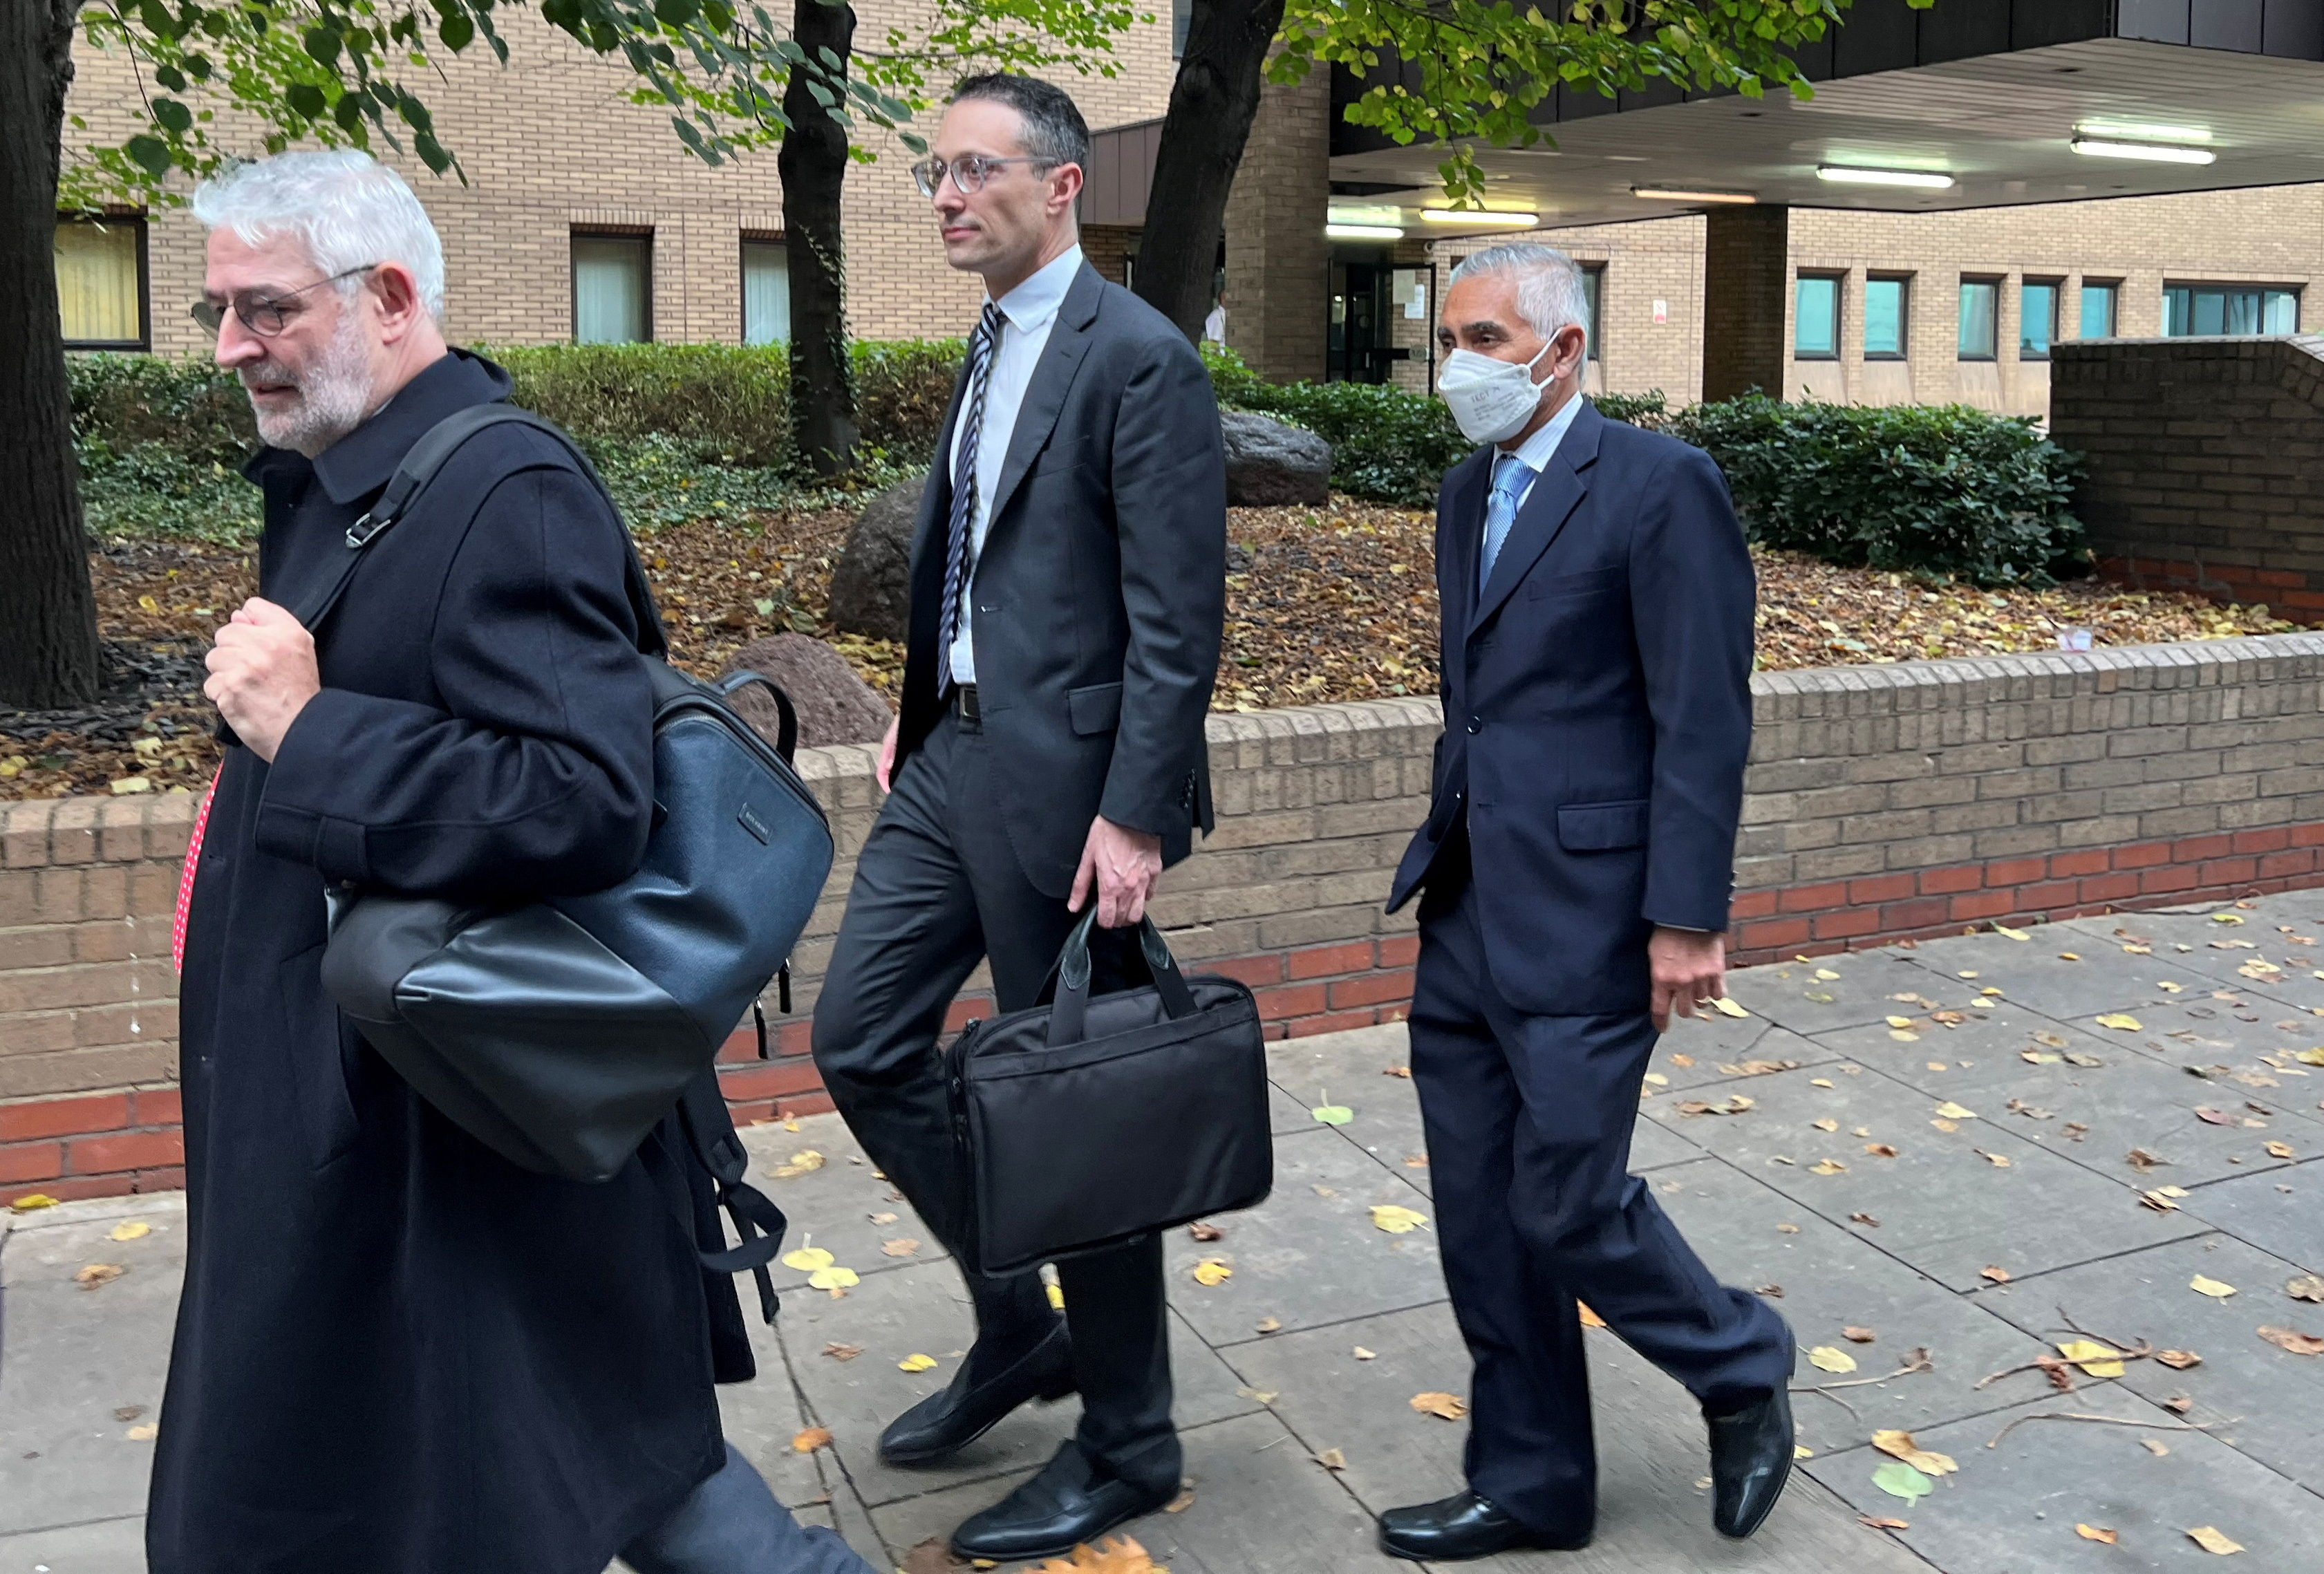 Glencore's chairman Kalidas Madhavpeddi and Glencore's general counsel Shaun Teichner leave Southwark Crown Court in London